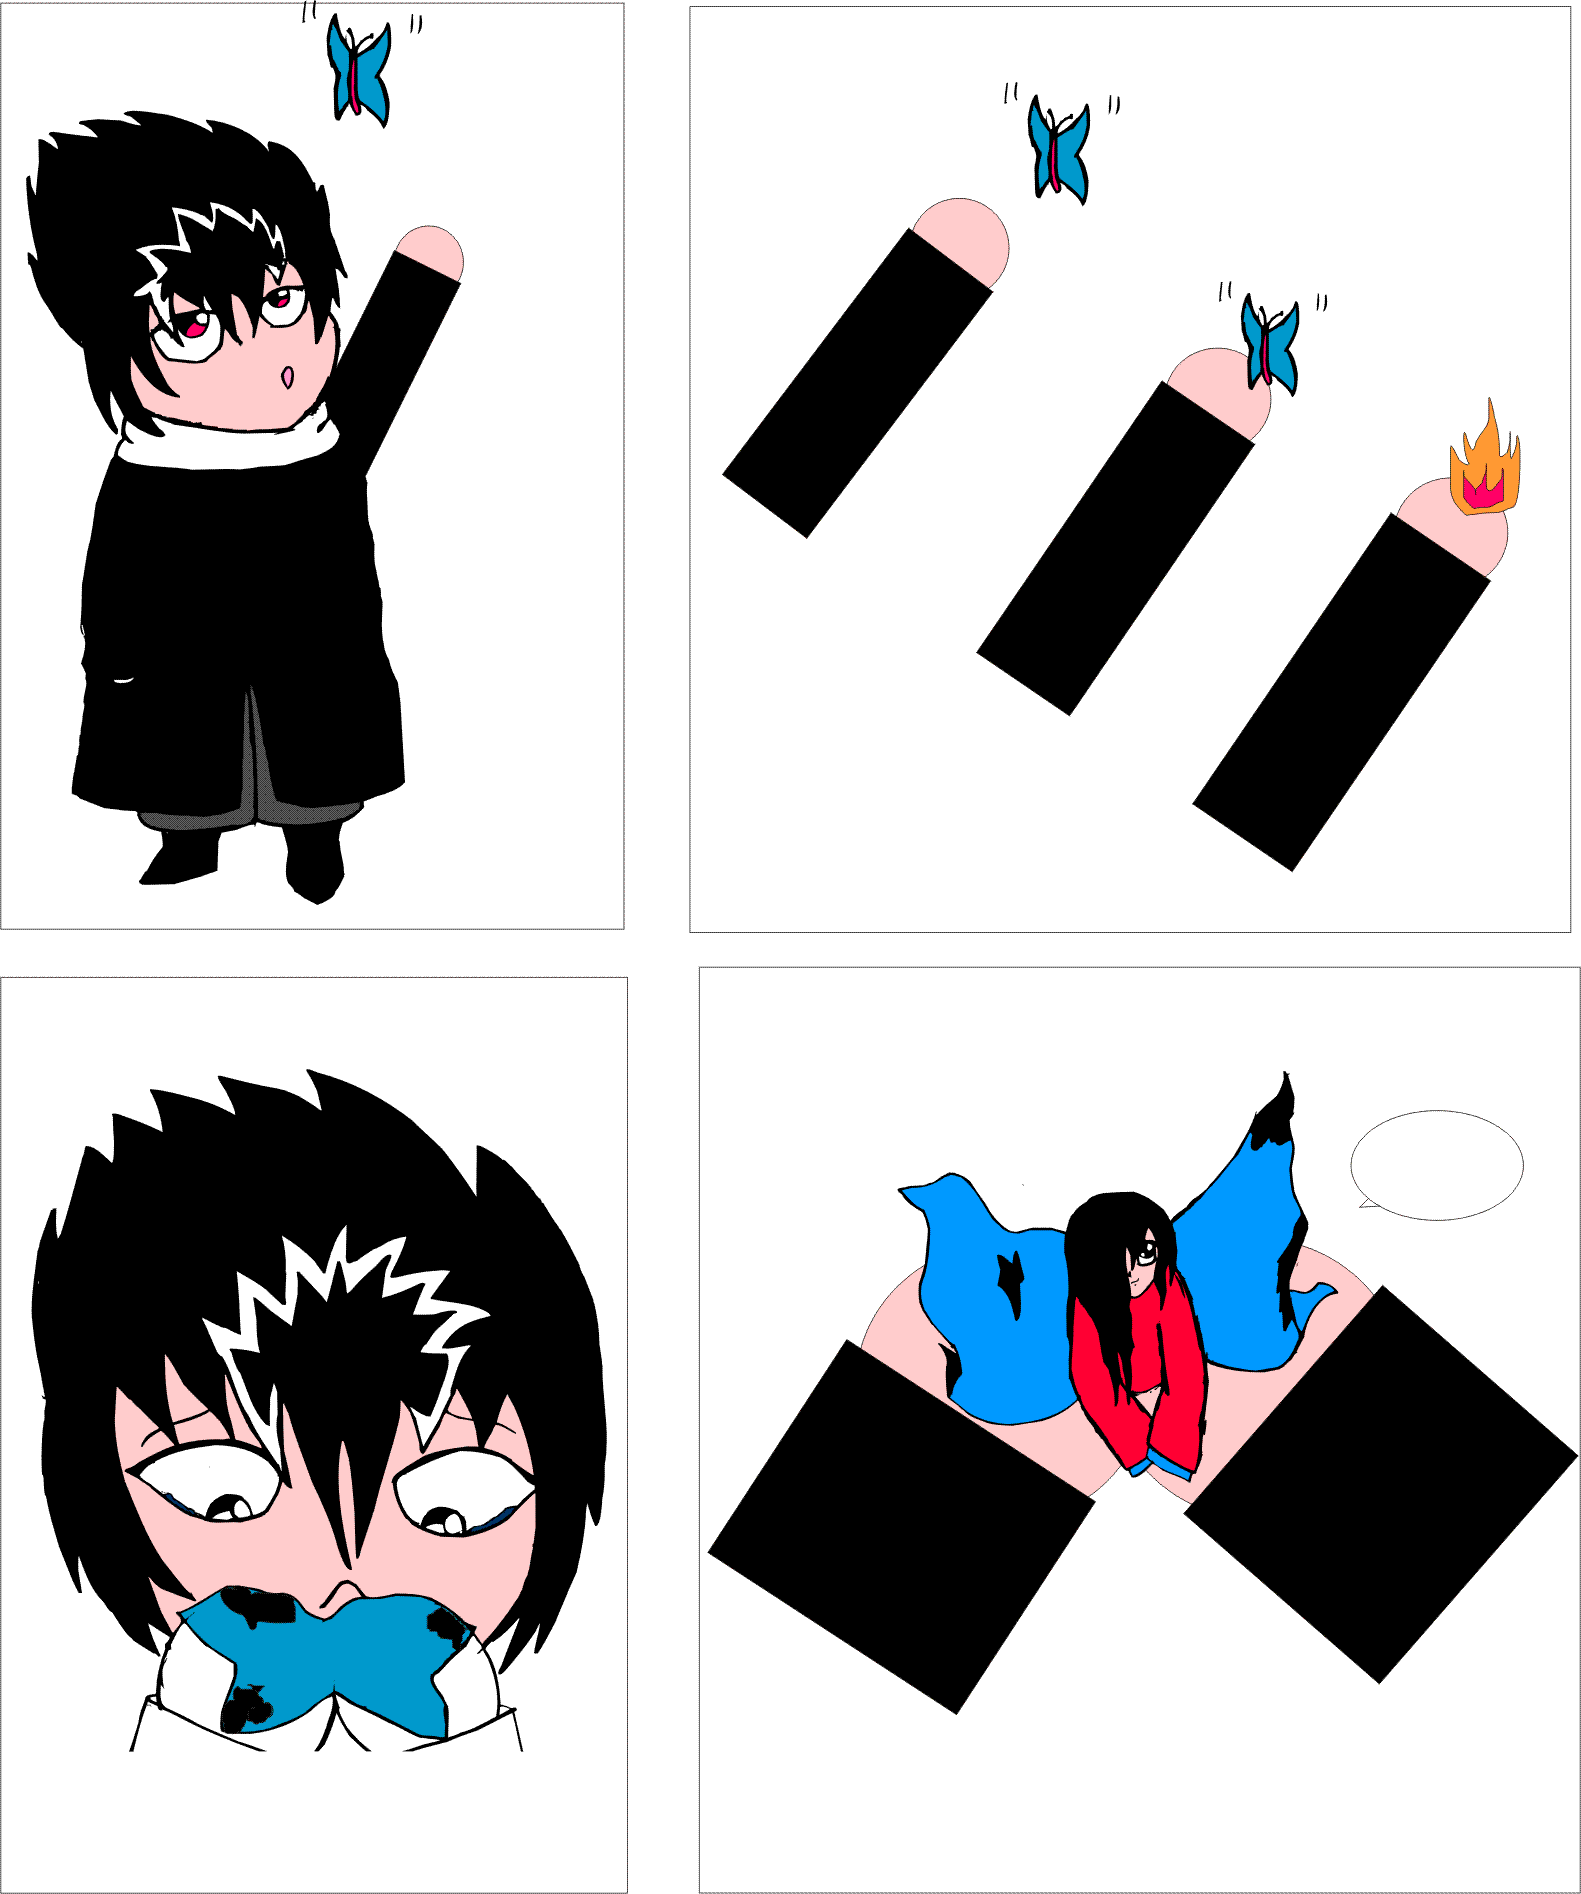 Hiei Find A Butterfly pg 2 by HieiandMe